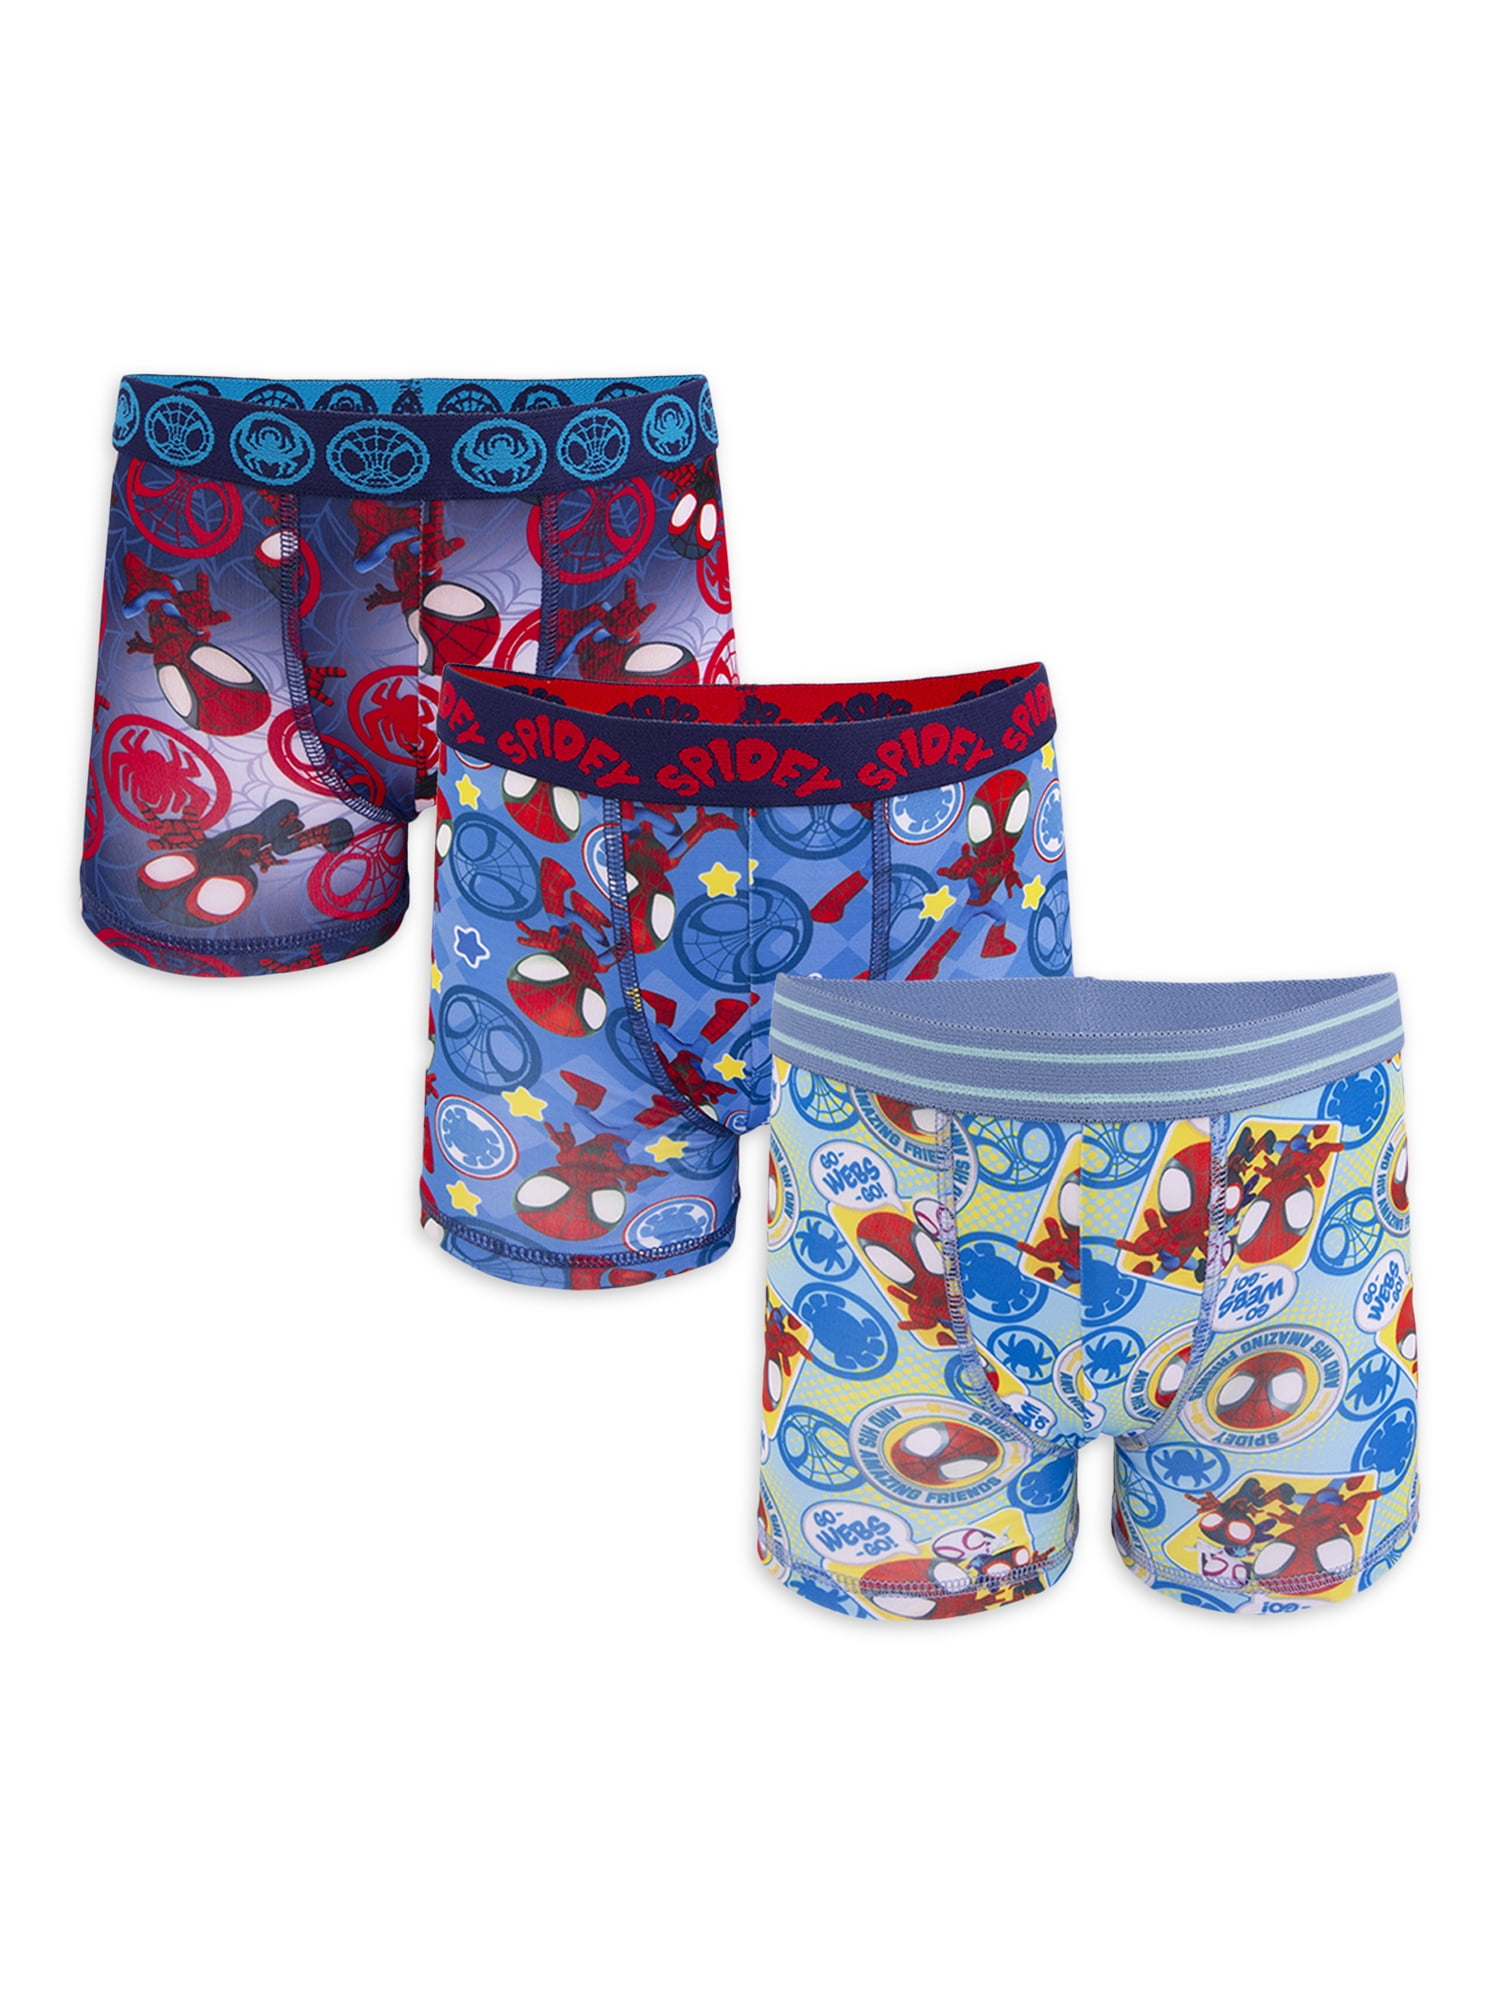 Spiderman Toddler Boys Boxer Briefs, 3 Pack, Sizes 2T-4T